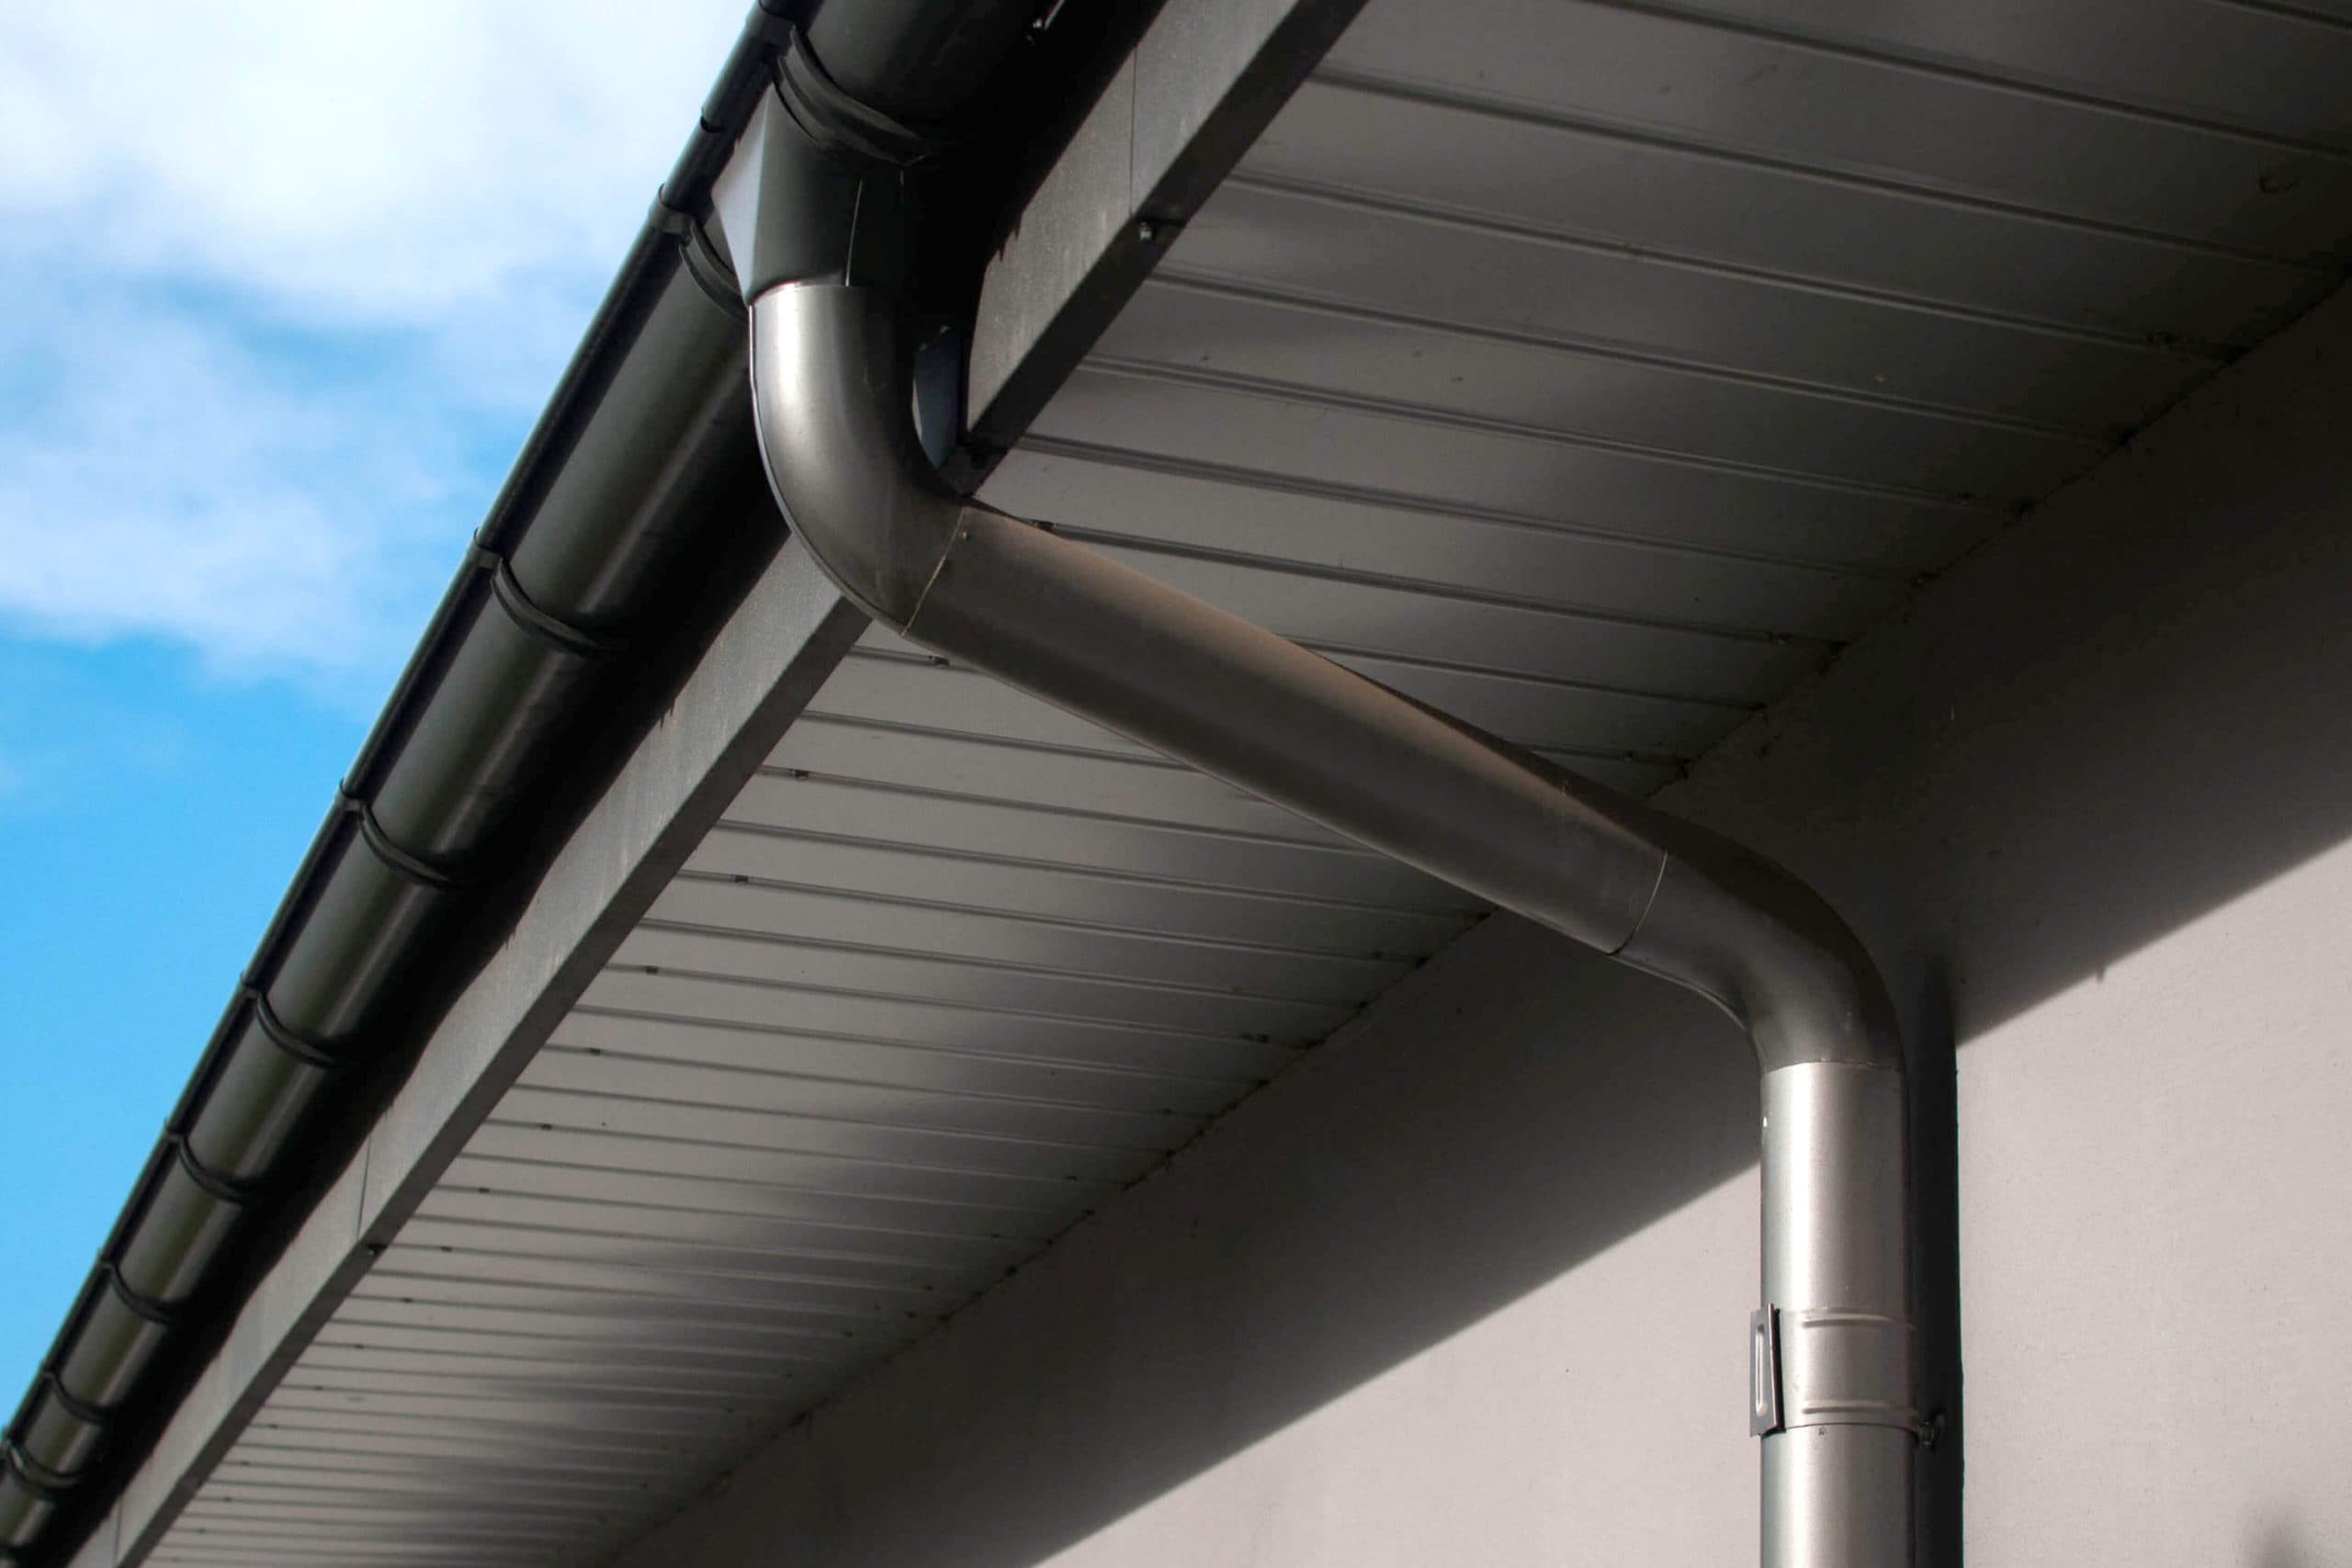 Reliable and affordable Galvanized gutters installation in Melbourne